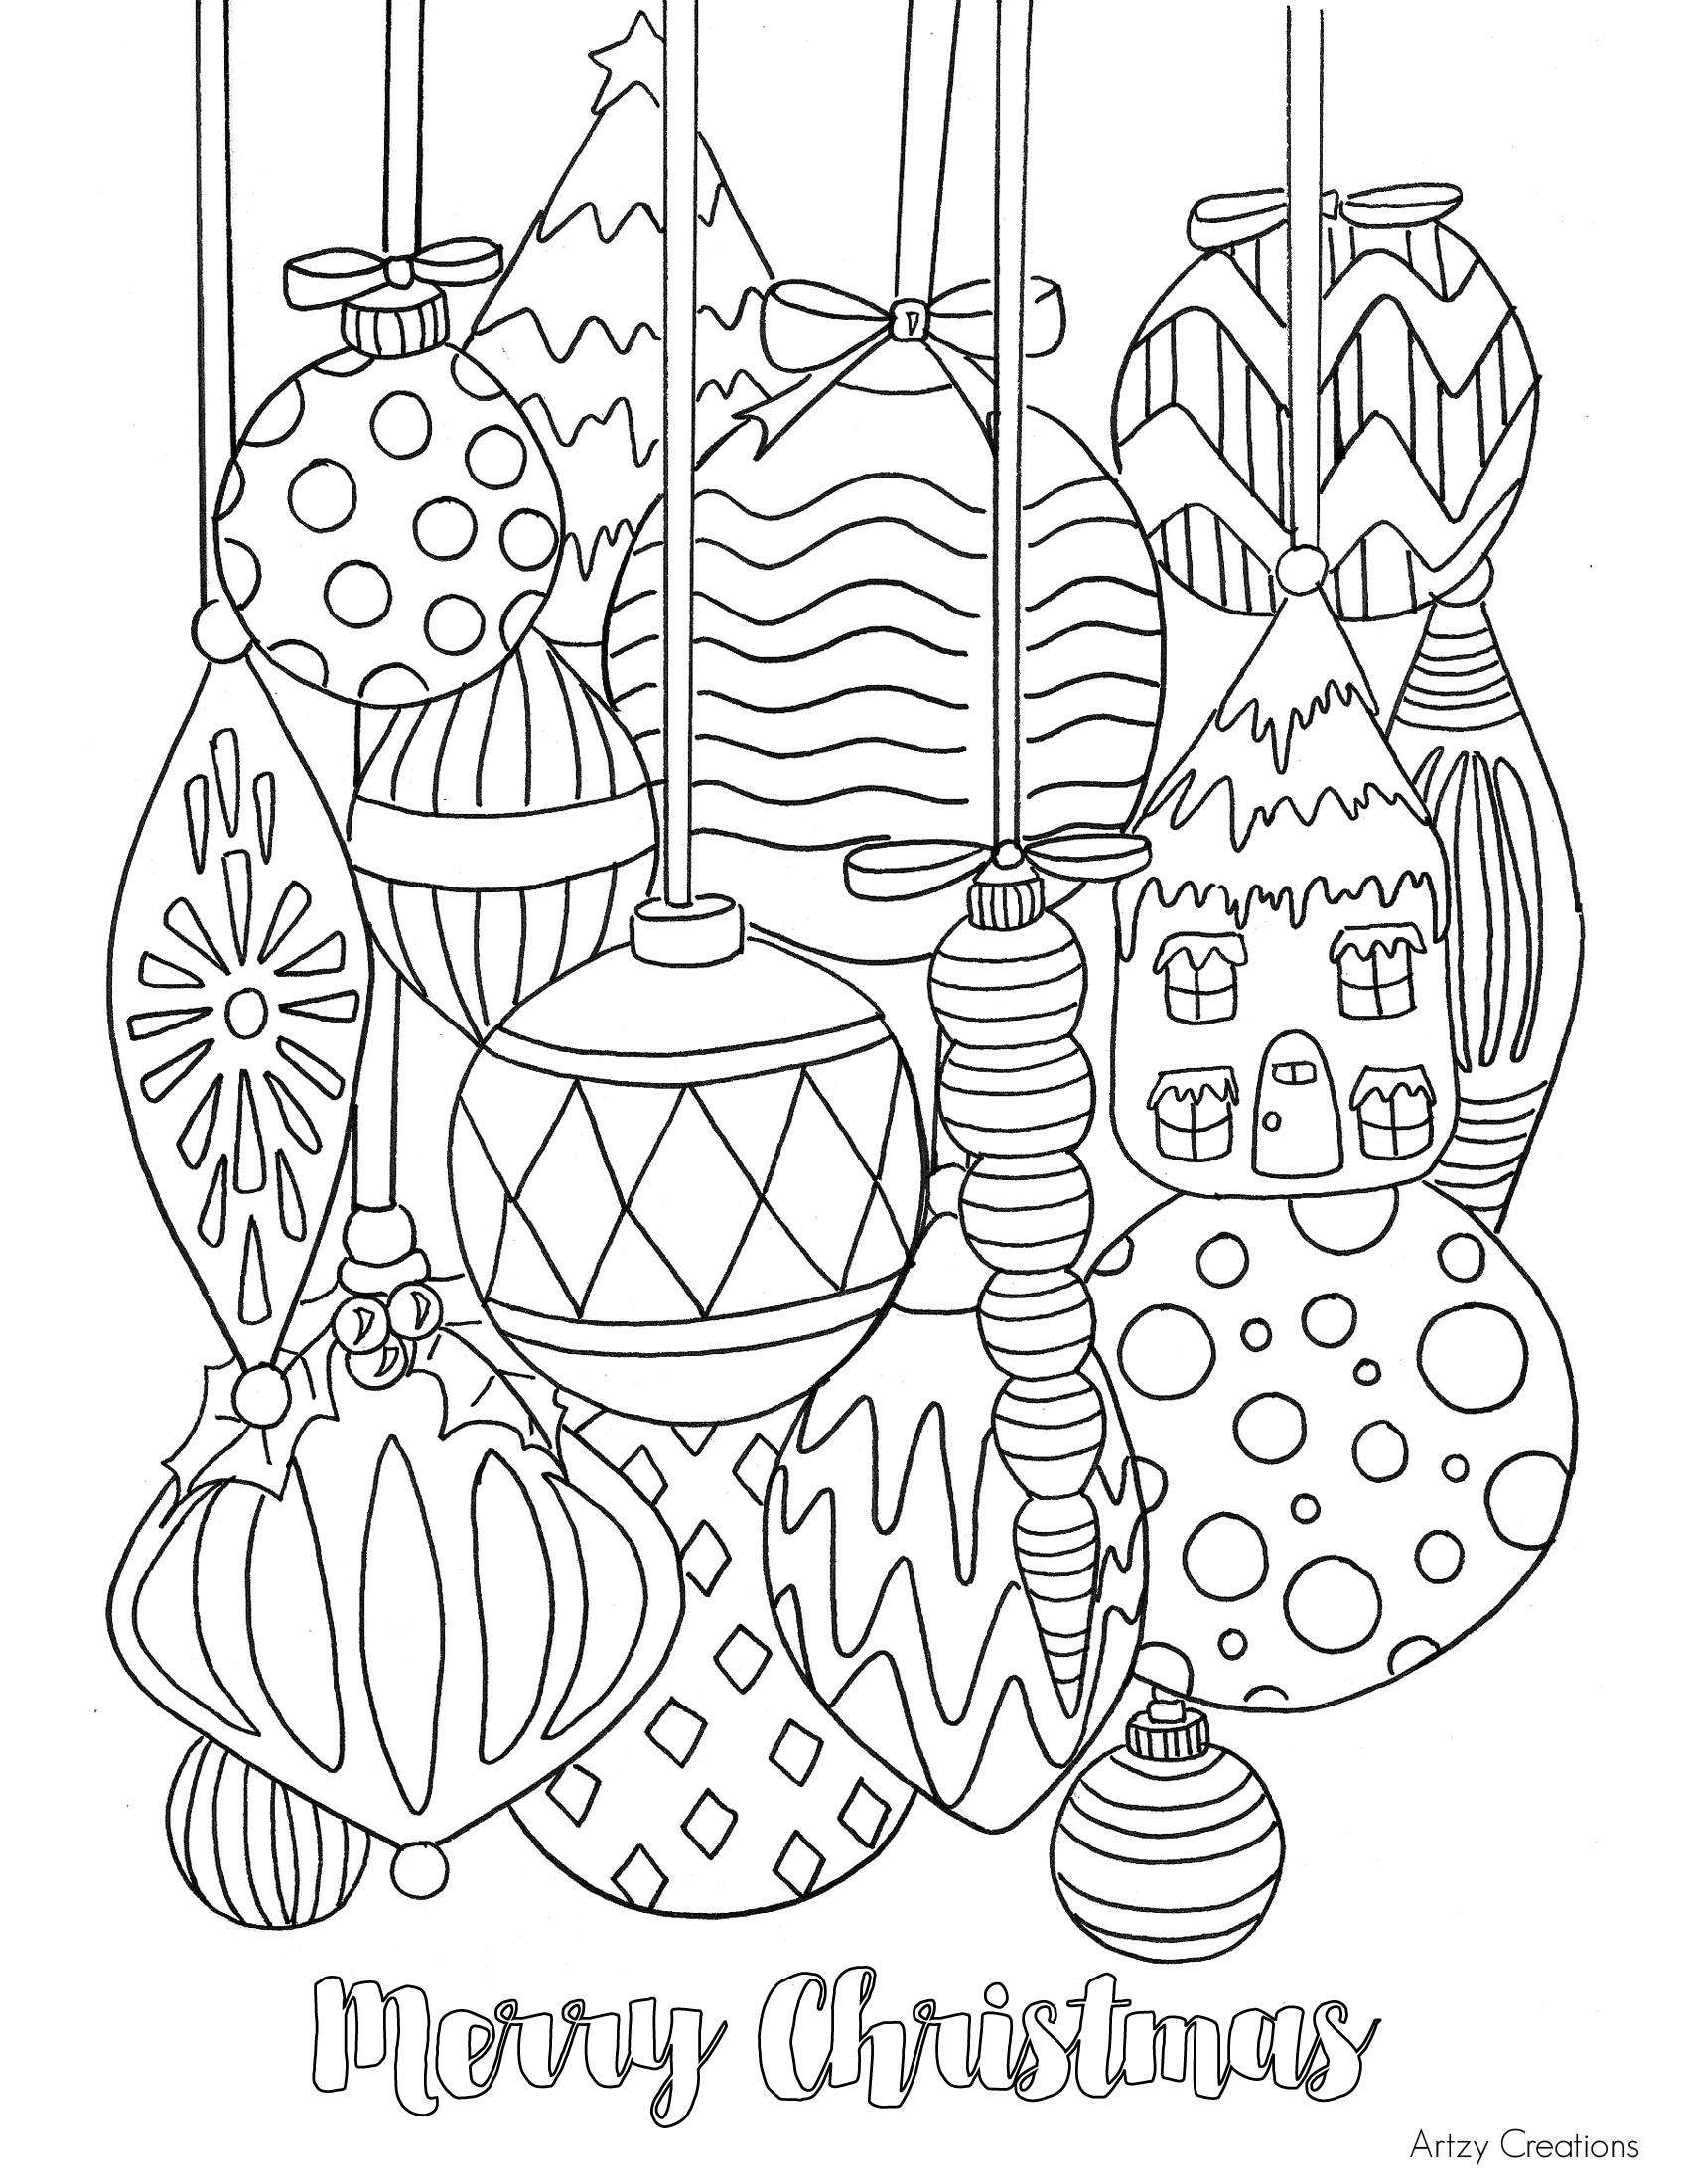 Printable Coloring Pages Christmas
 Free Christmas Ornament Coloring Page TGIF This